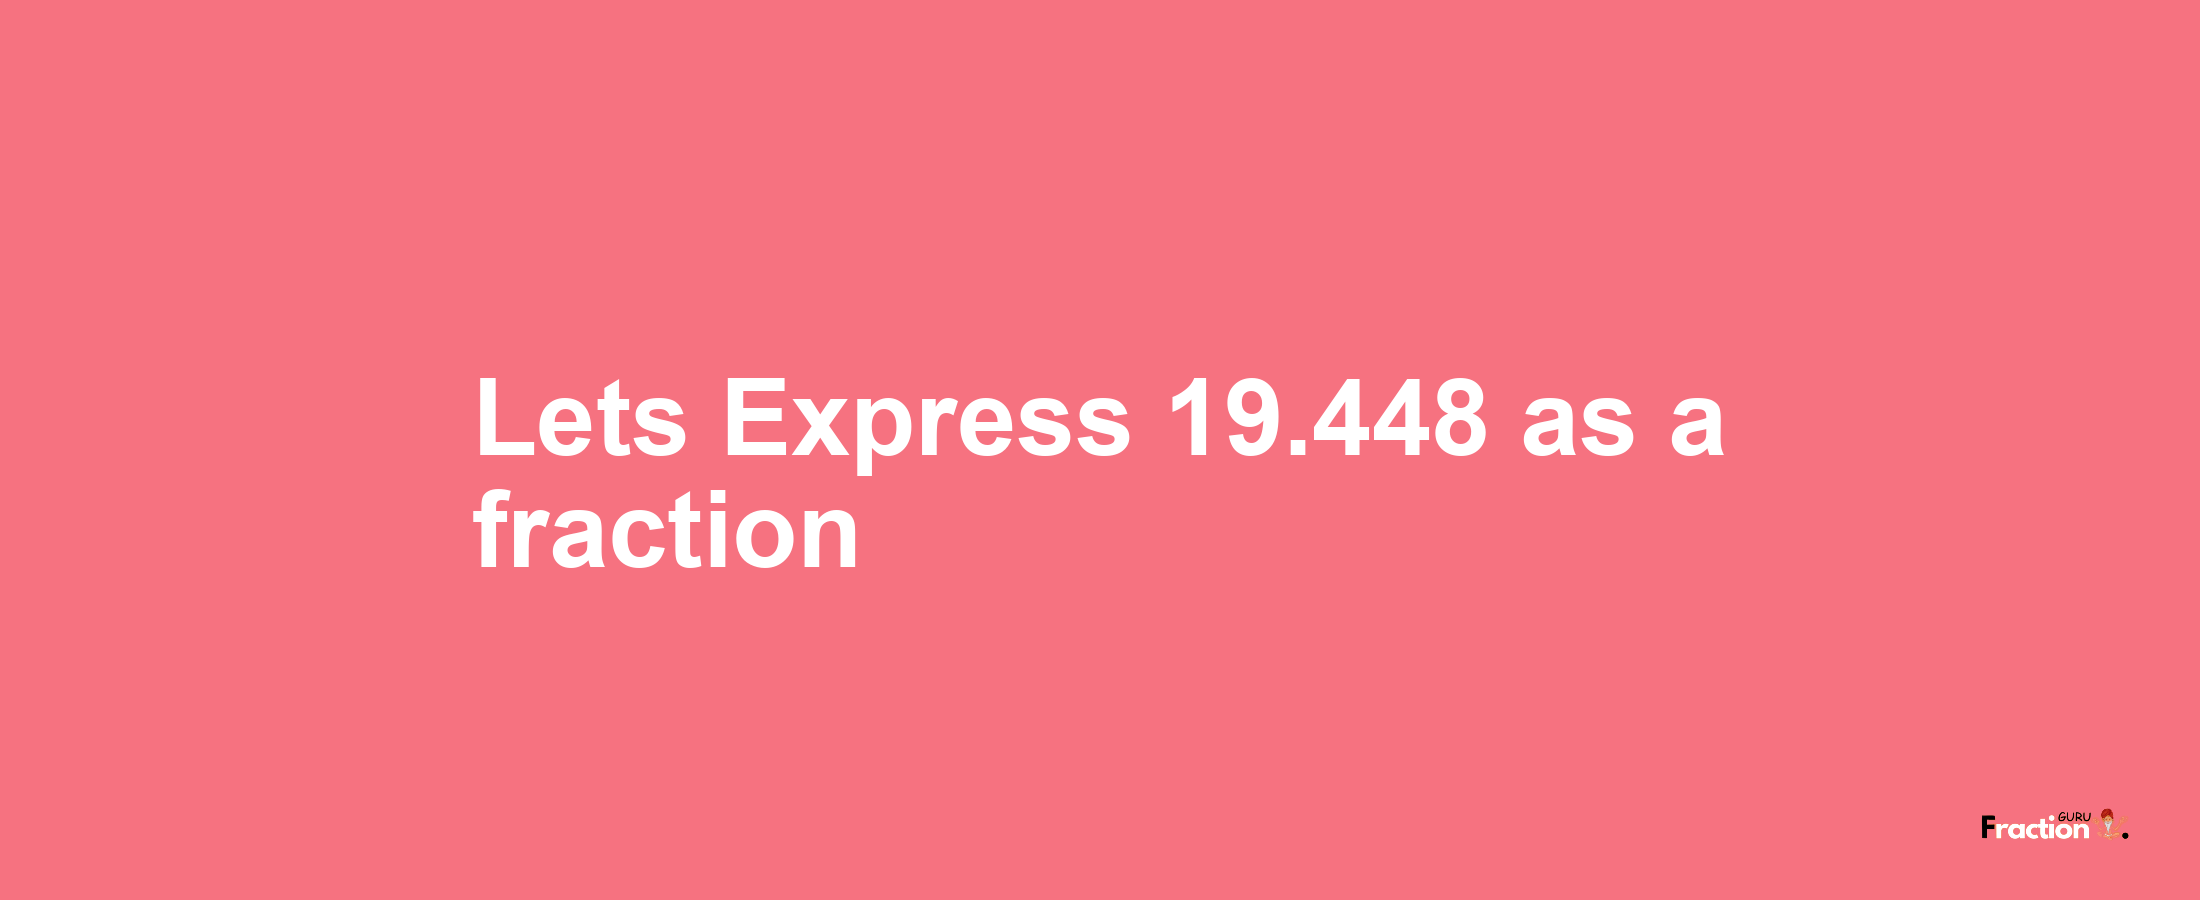 Lets Express 19.448 as afraction